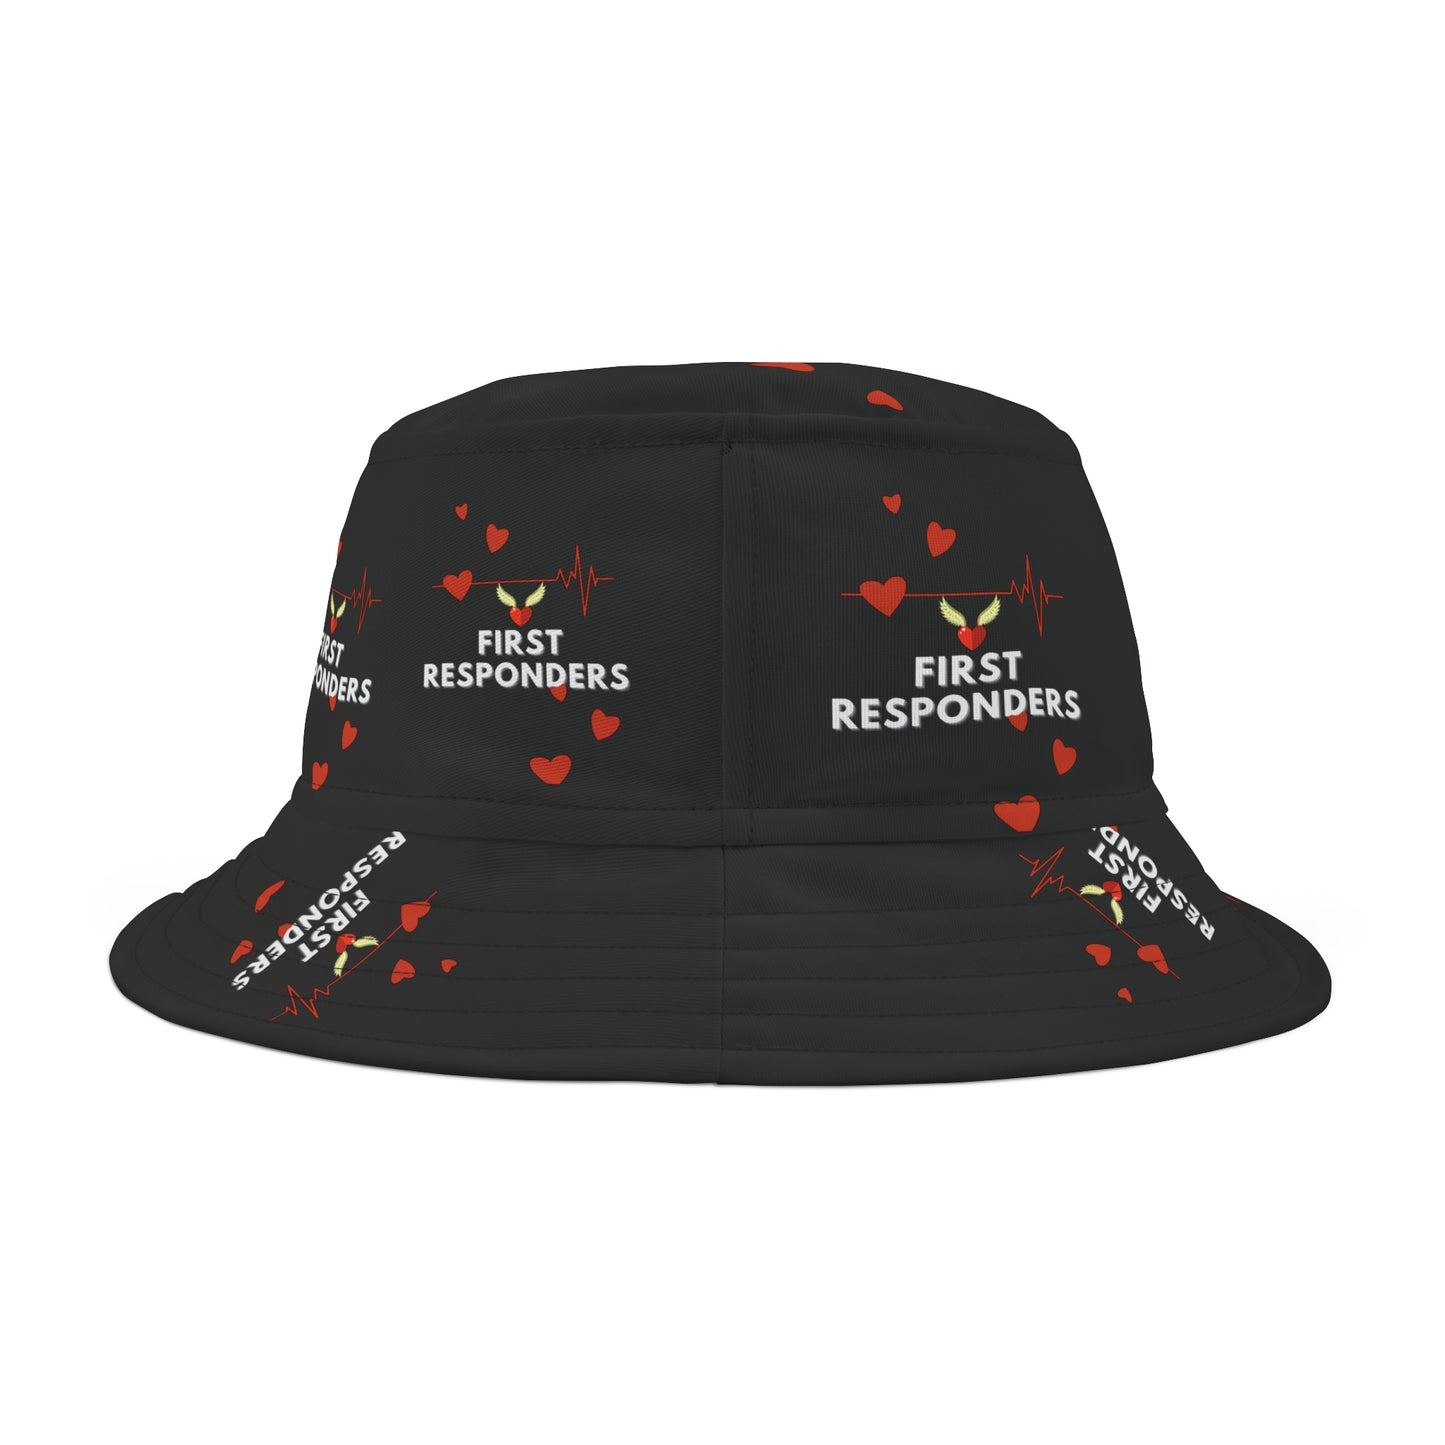 First Responders Themed Bucket Hat